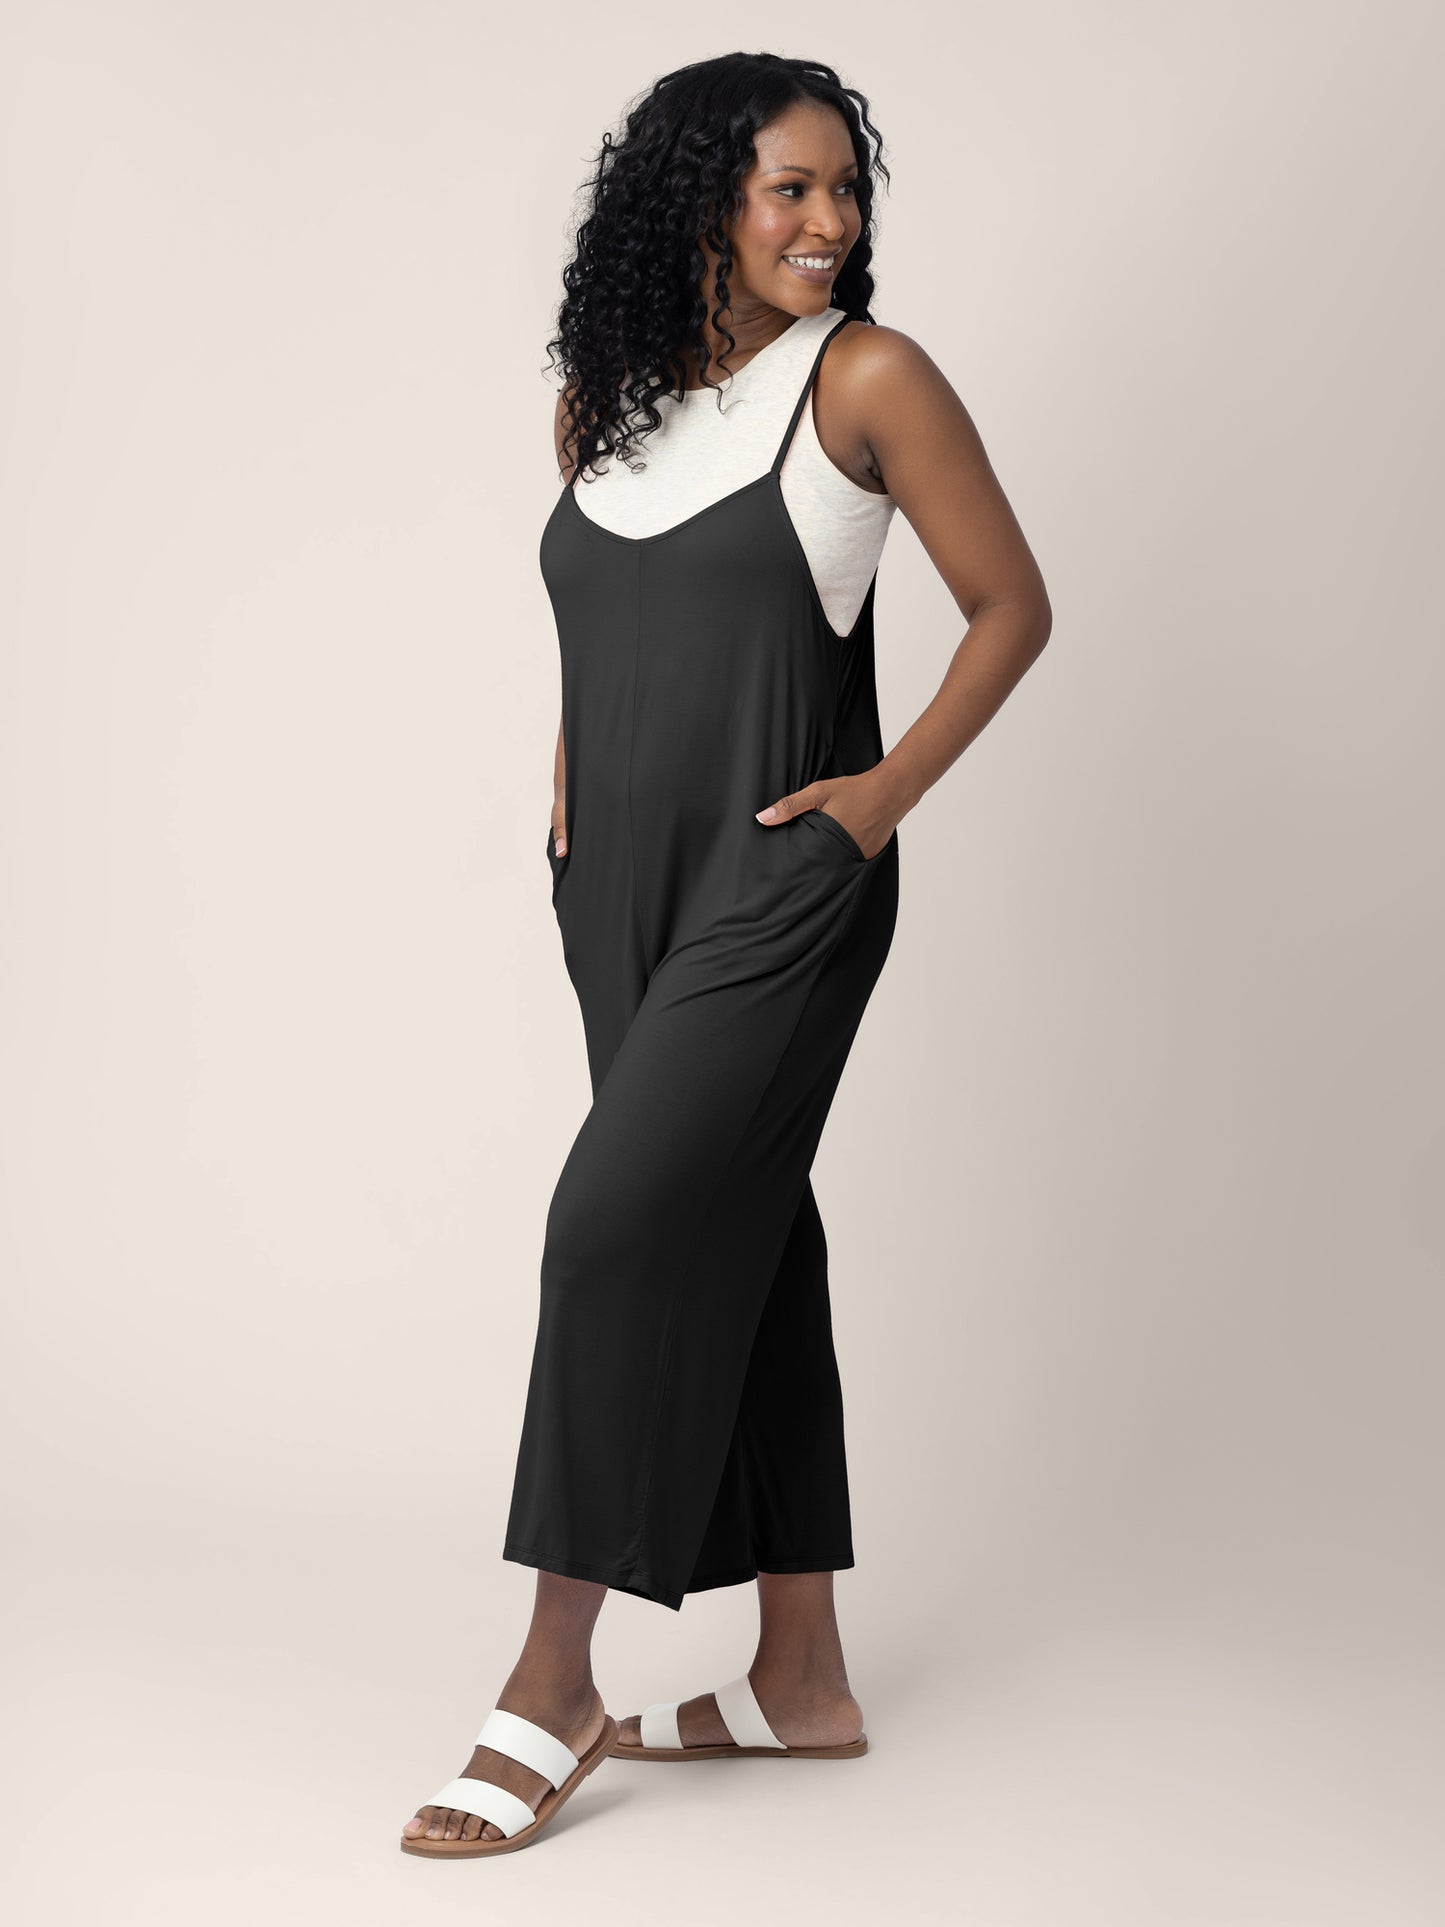 Model wearing the Charlie Maternity & Nursing Romper in Black looking to the right of the image